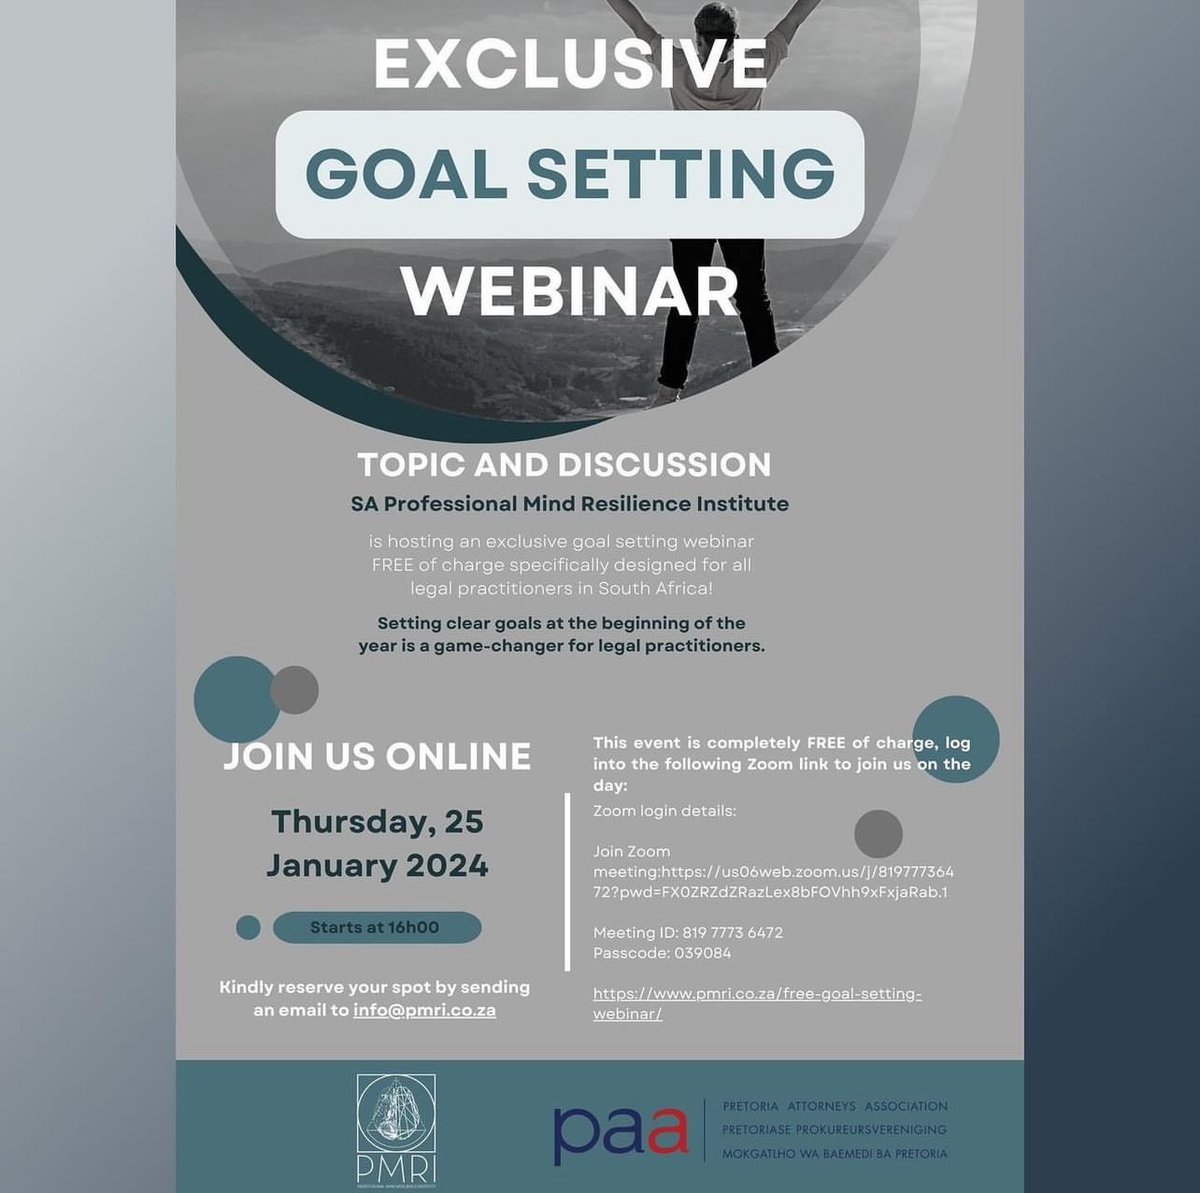 We are excited and proud to partner with the Pretoria Attorneys Association for the exclusive goal setting webinar. Send an email to info@pmri.co.za for more details. 

#goalsetting2024
#goalsetting
#personaldevelopment
#lawyerlife
#lawyer